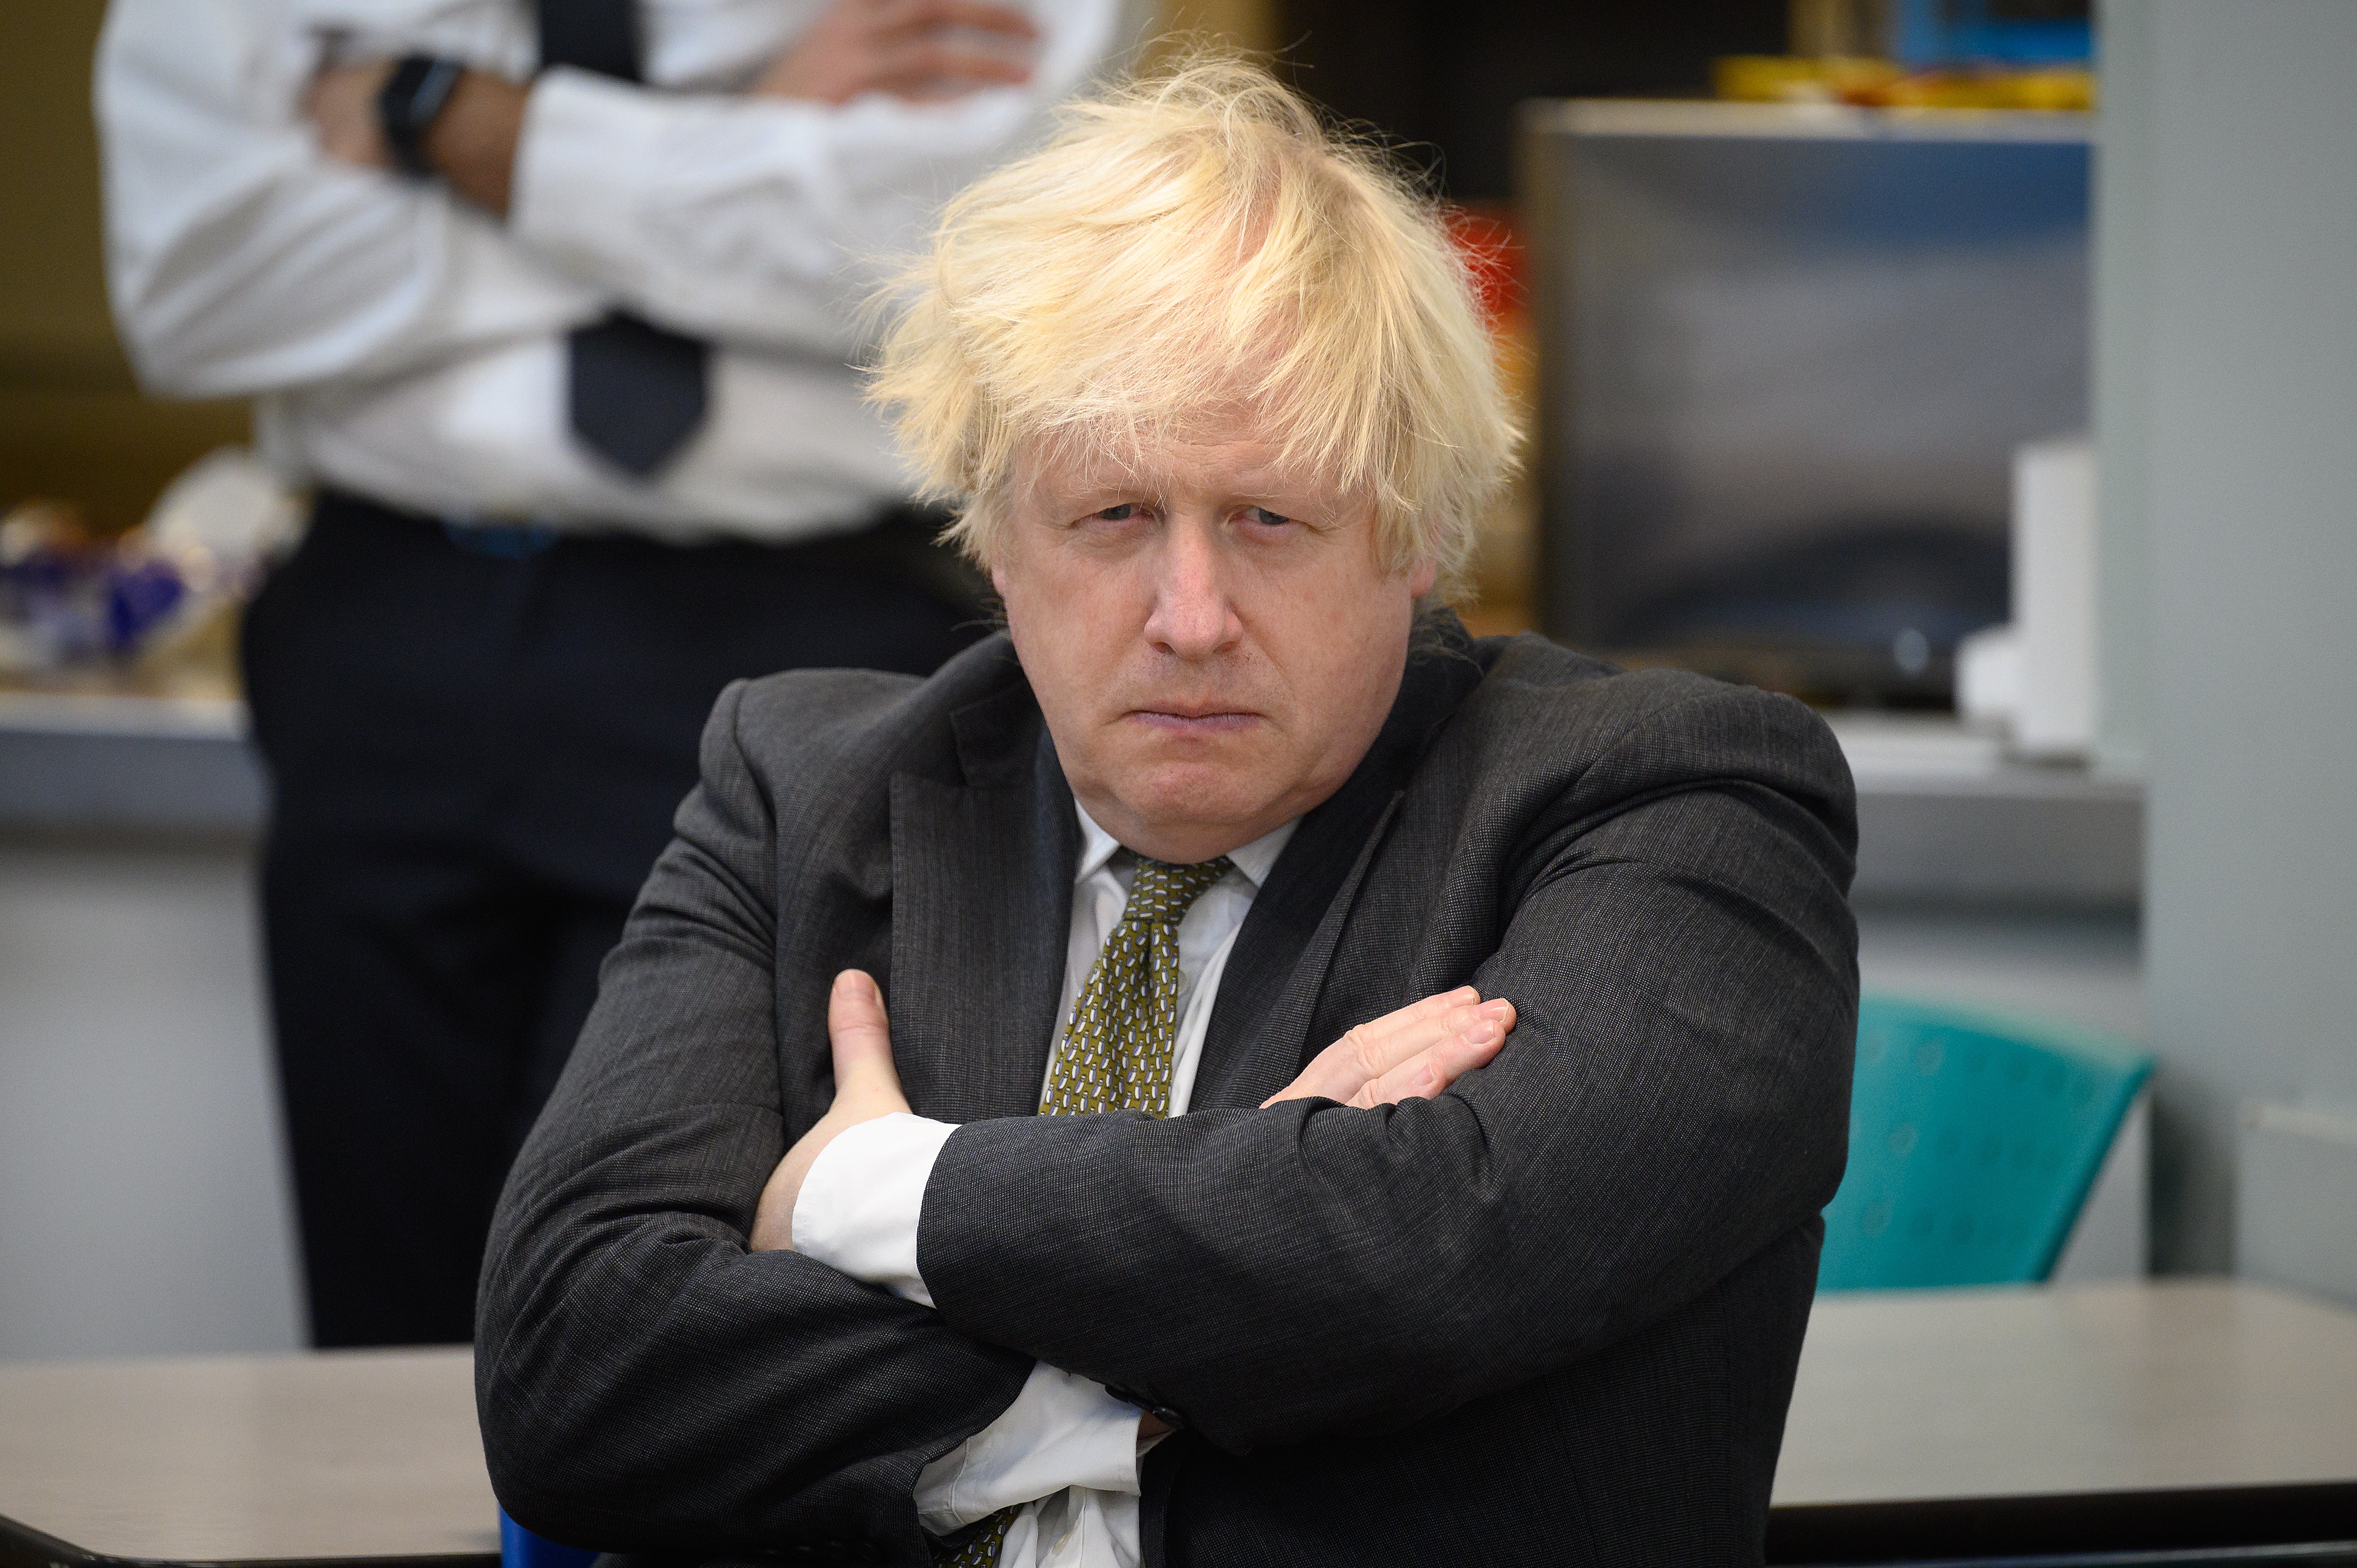 Boris Johnson has been blamed for the by-election defeat in North Shropshire